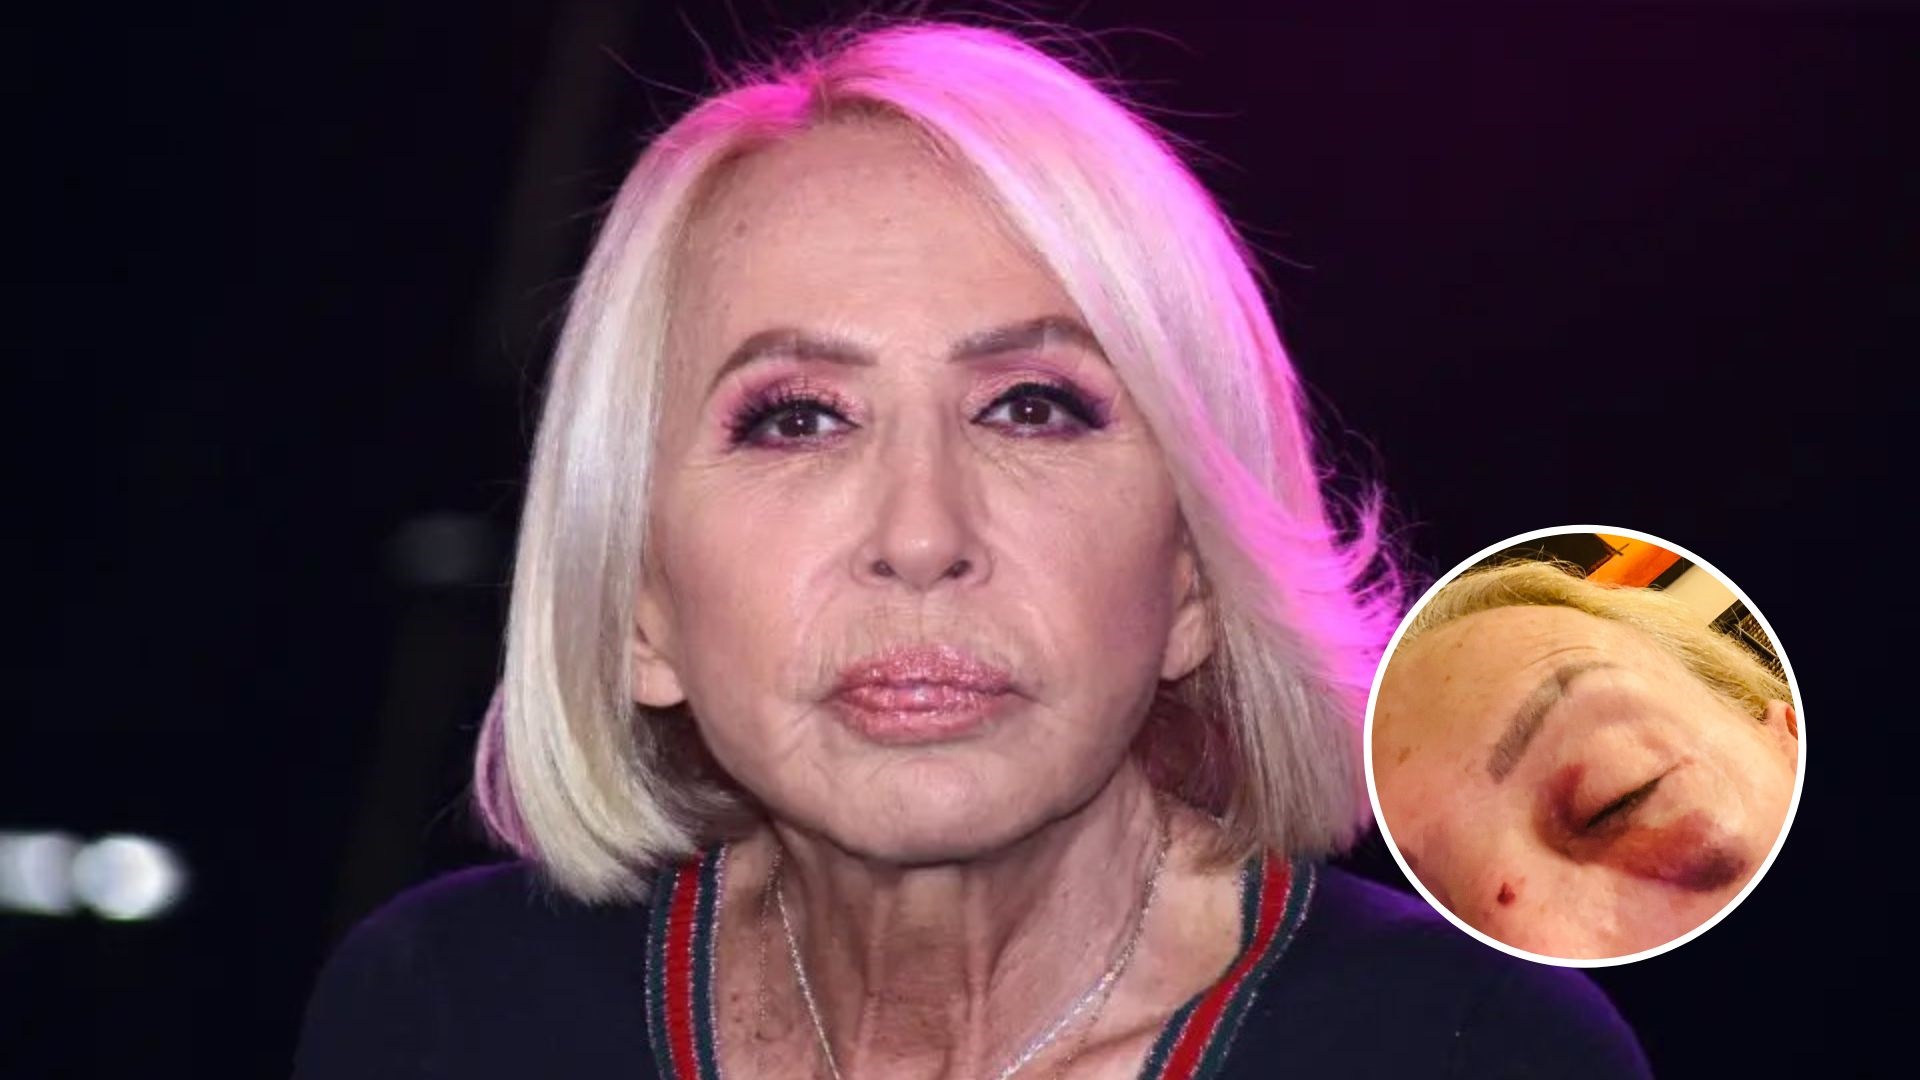 Laura Bozzo appeared with bruises on her face after suffering an anxiety attack